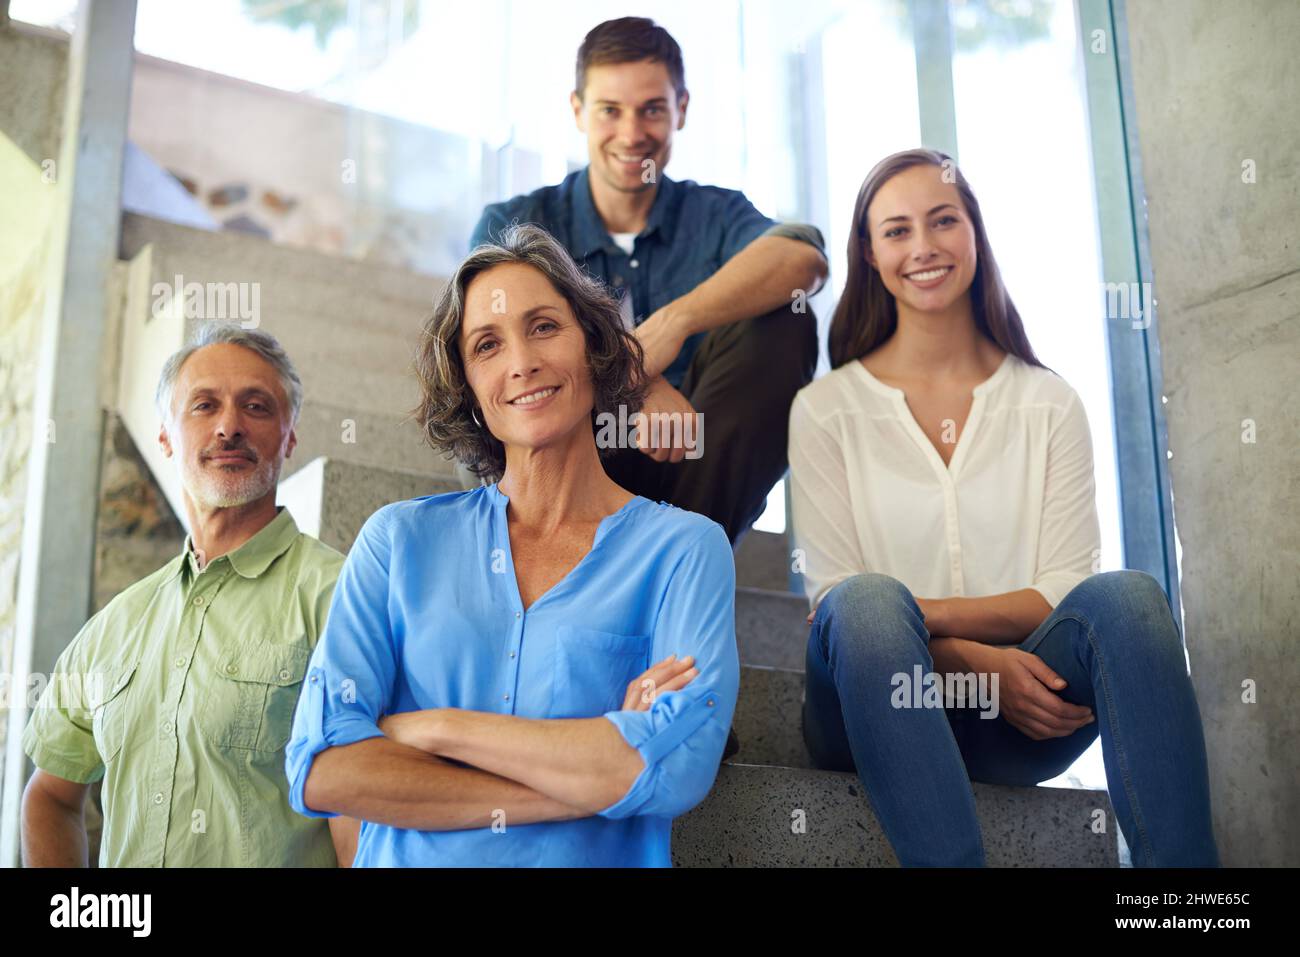 Welcome to our happy home. Shot of a mother and father standing in front of their adult children on the stairs. Stock Photo